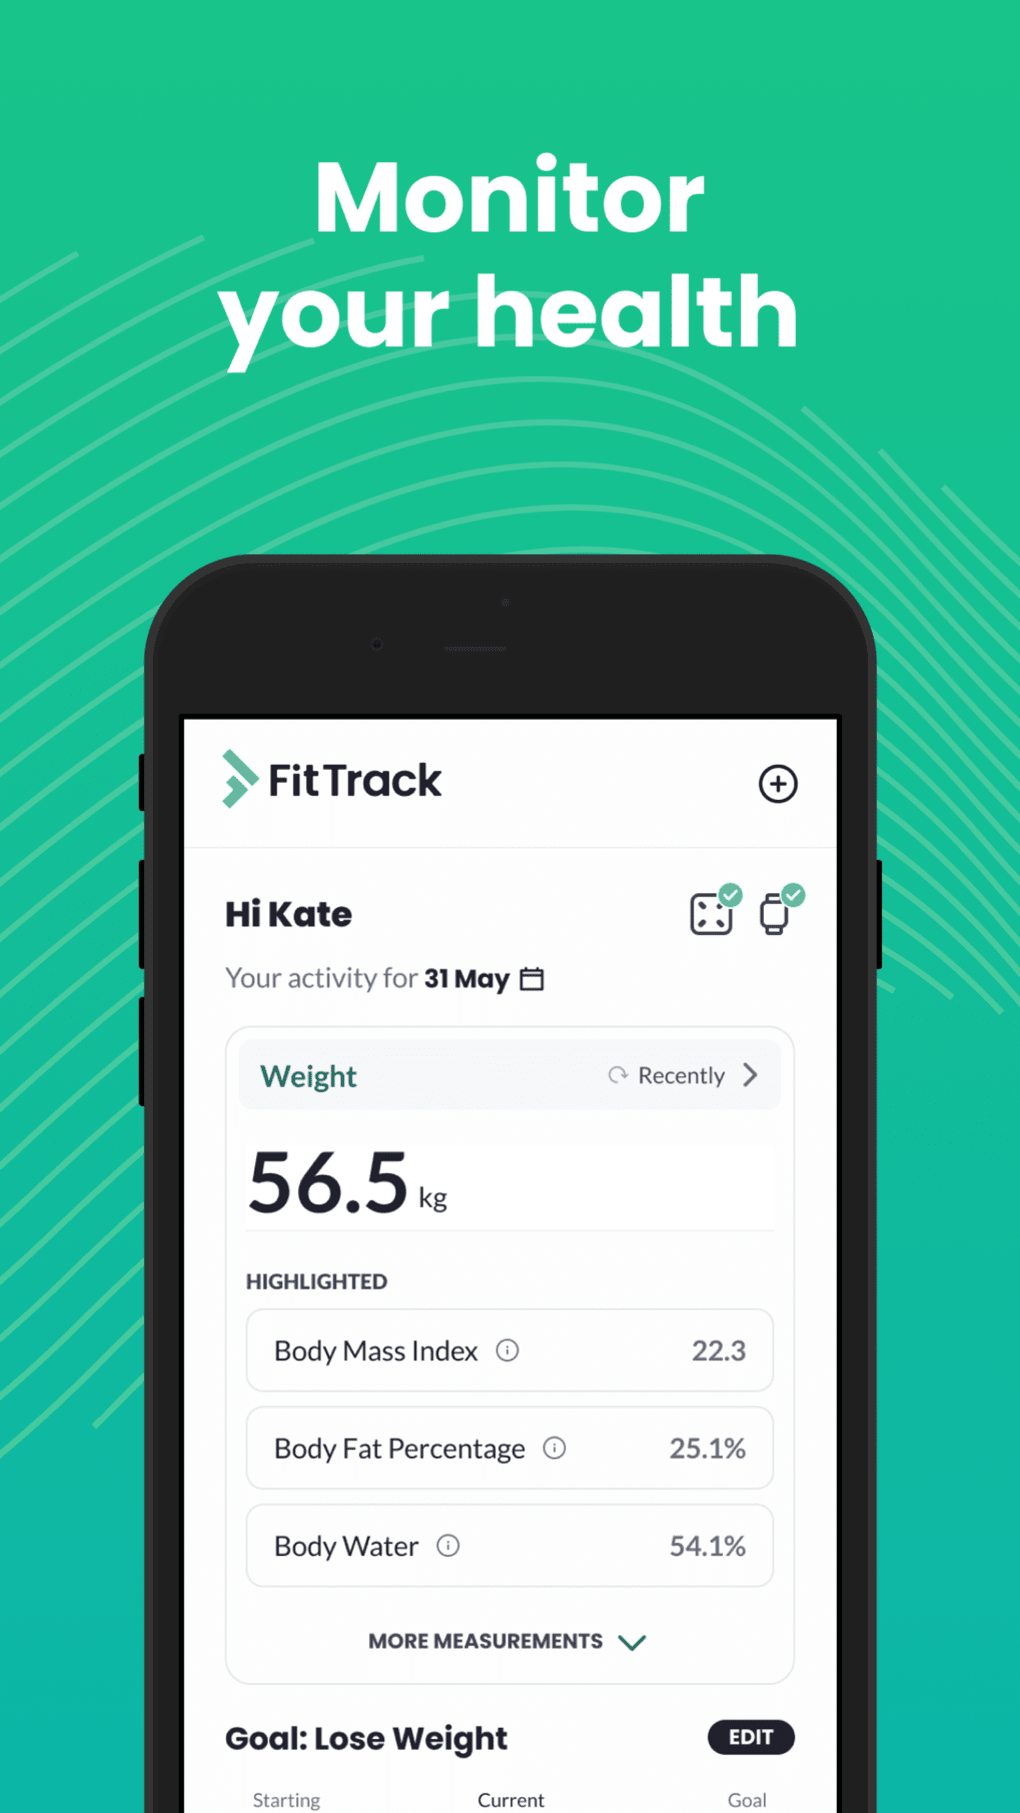  FITTRACK